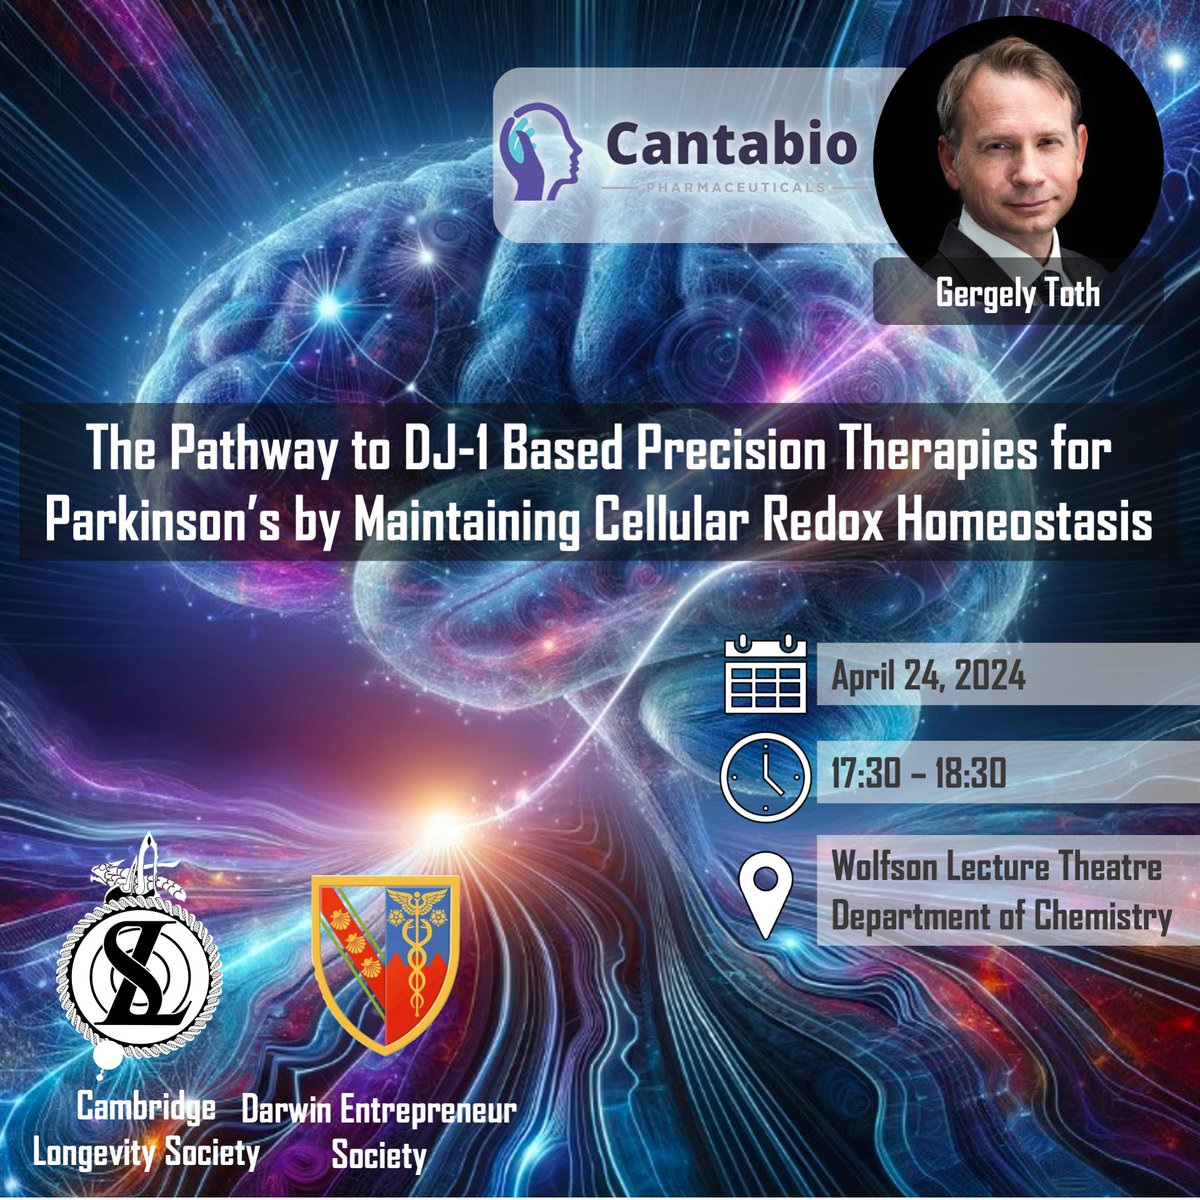 👉 Join us for an enlightening presentation on 'The Pathway to DJ-1 Based Precision Therapies for Parkinson’s by Maintaining Cellular Redox Homeostasis.' by Gergely Toth together with Darwin Entrepreneurs Club. 

⭐️⭐️ Abstract ⭐️⭐️
This talk will explore the critical role of DJ-1…